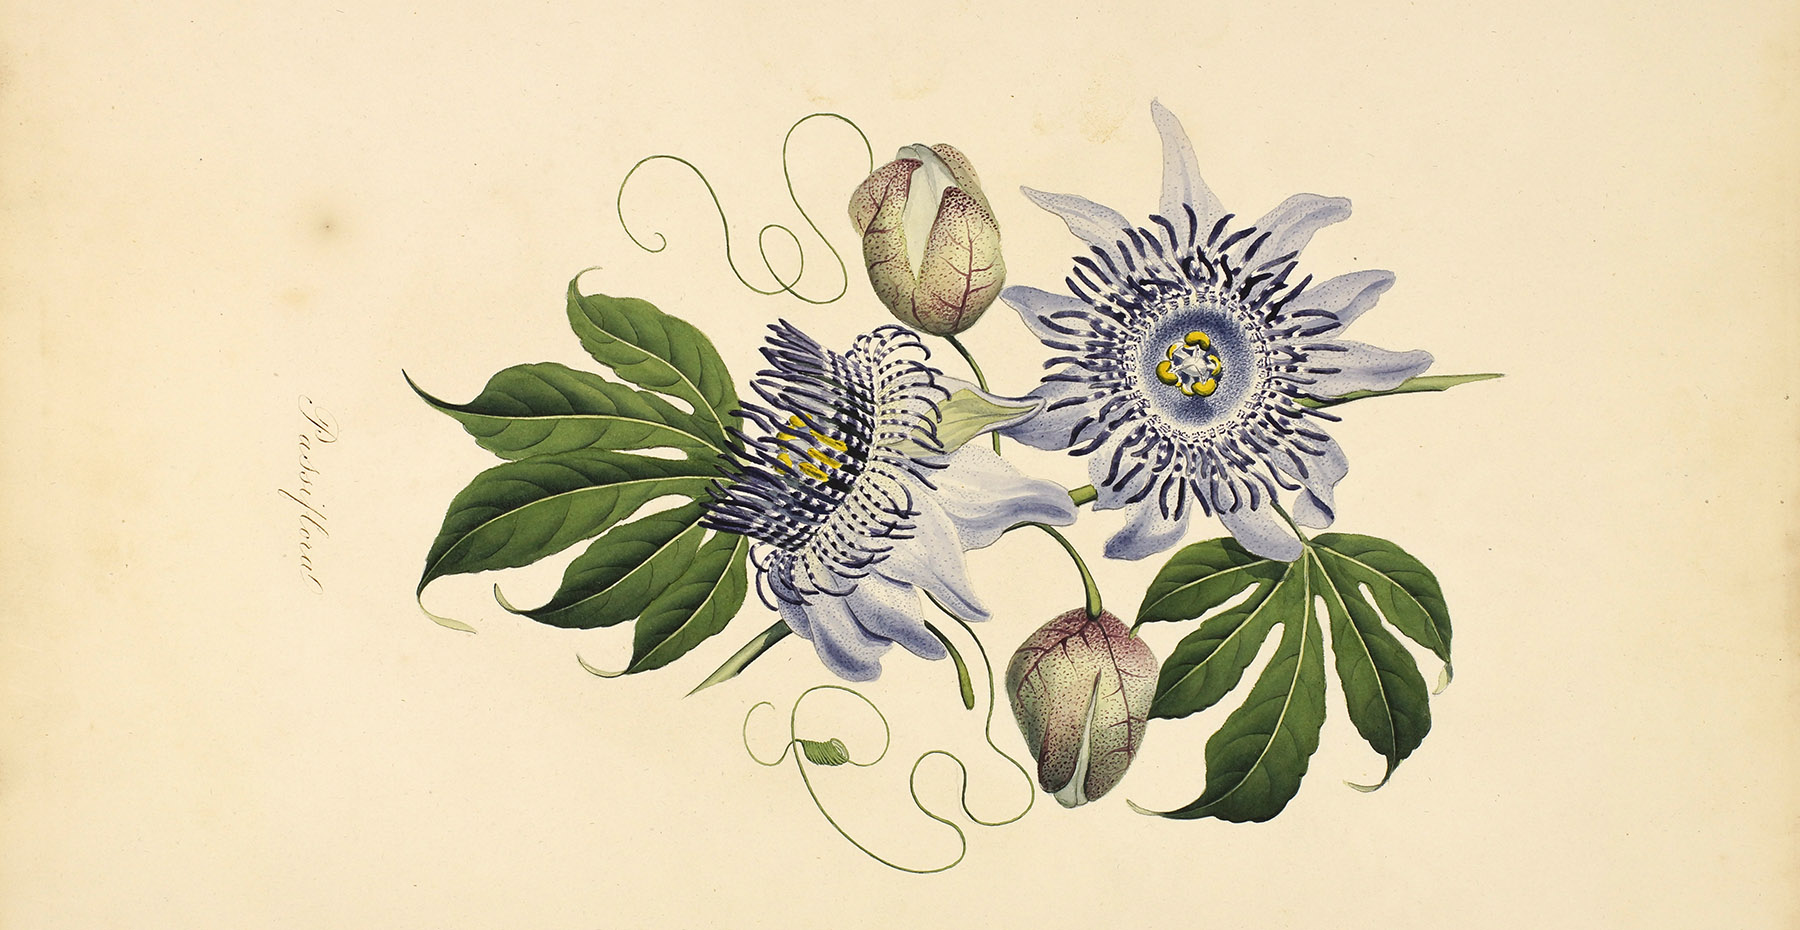 18th-century drawing of a passionflower by a black Caribbean artist and botanist